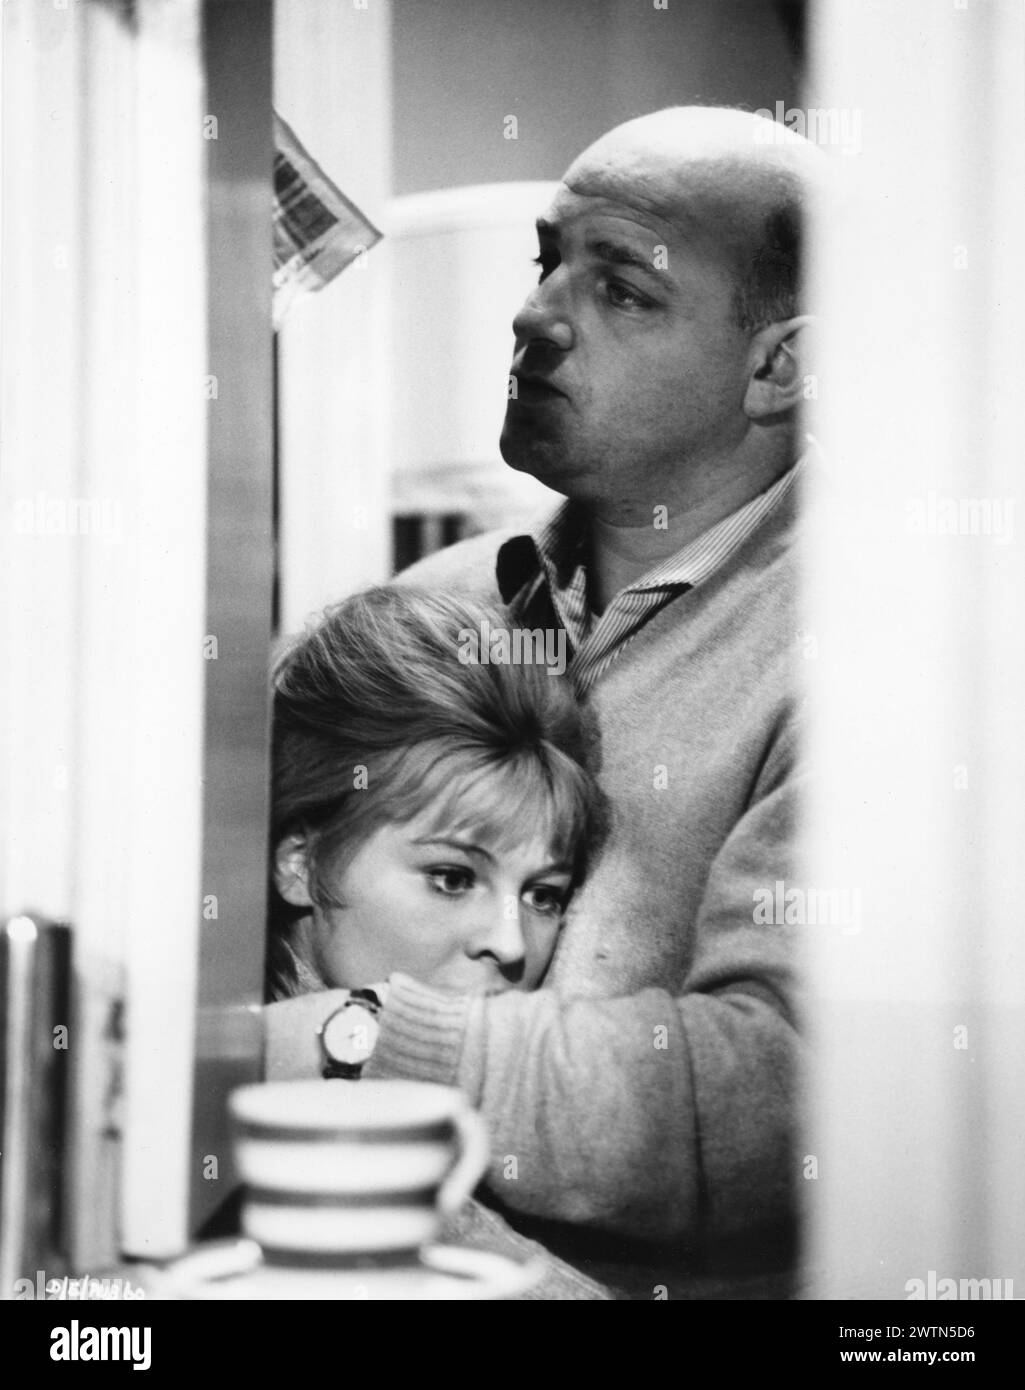 A candid photo of British Actress JULIE CHRISTIE and JOHN SCHLESINGER during the making of DARLING 1965  Director JOHN SCHLESINGER  Screenplay FREDERIC RAPHAEL Costume Design JULIE HARRIS Music JOHN DANKWORTH Vic-Appia Films / Anglo Amalgamated Stock Photo